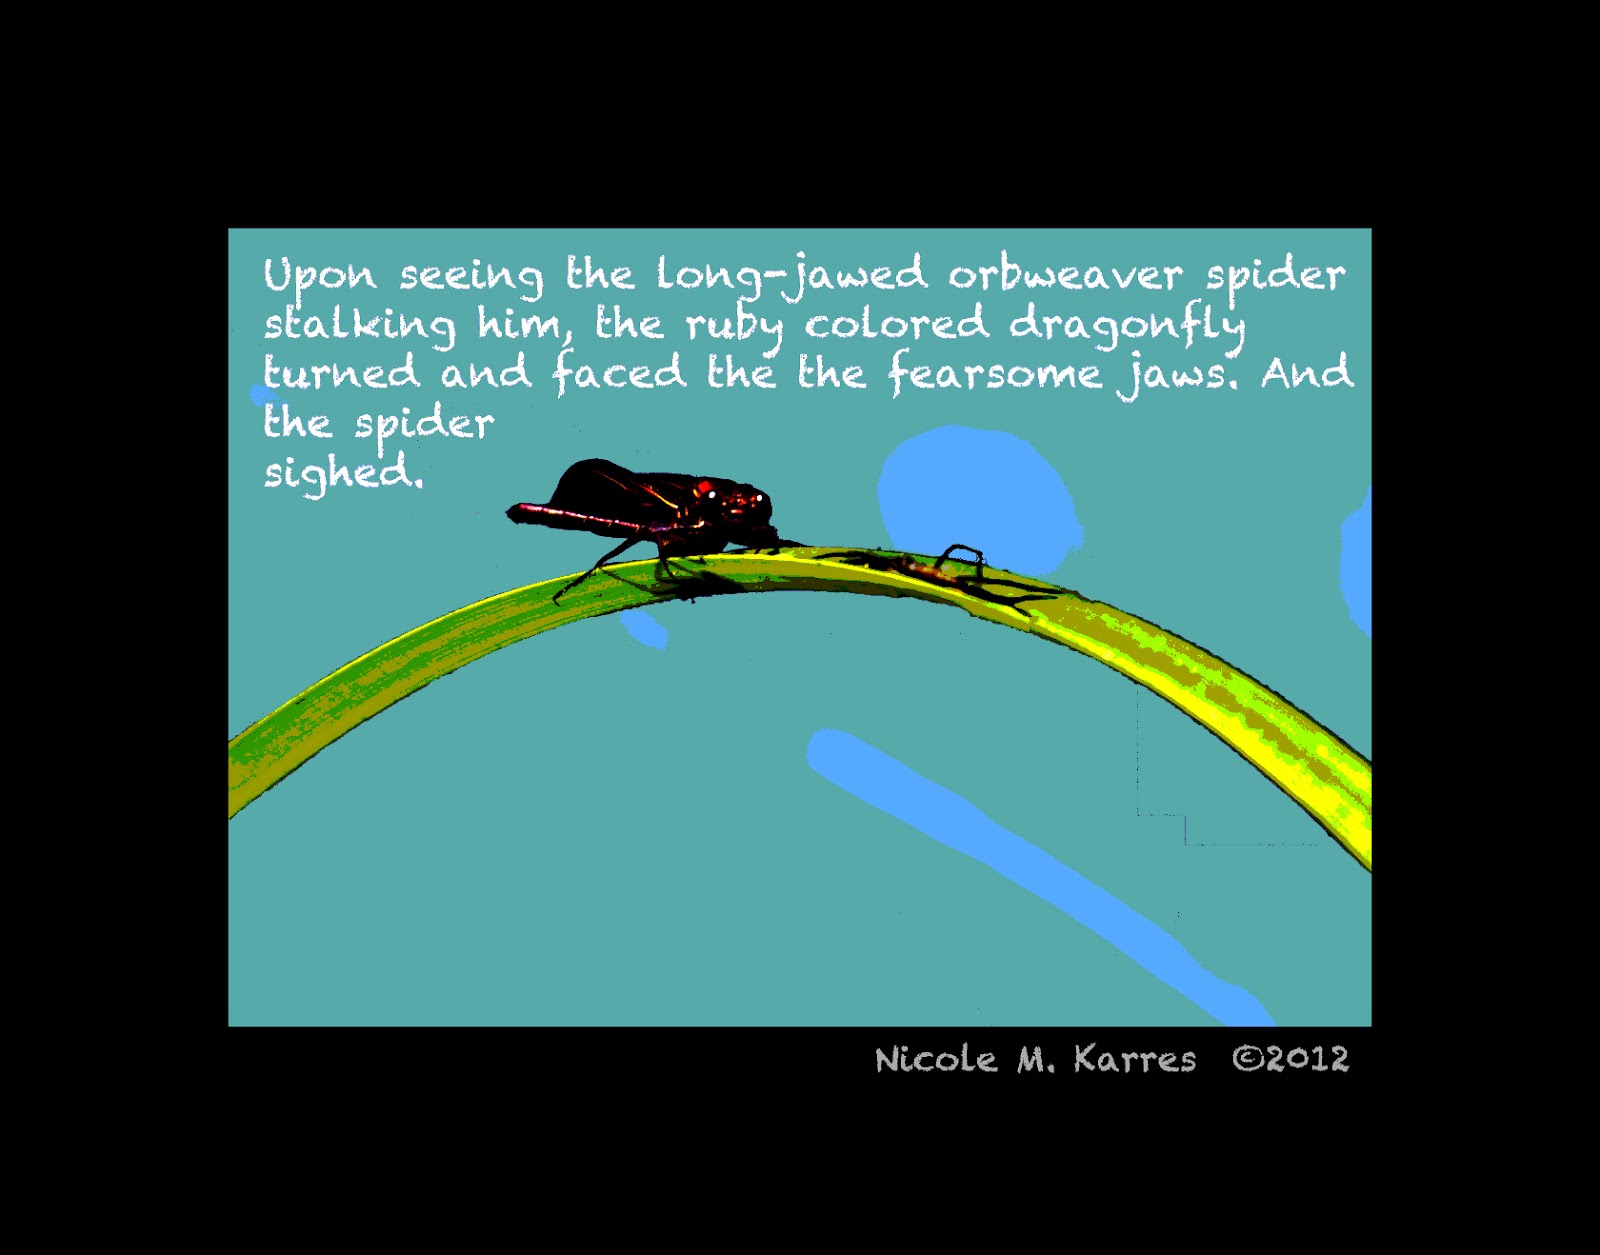 Notes On Urban Ecology The Long Jawed Orb Weaver